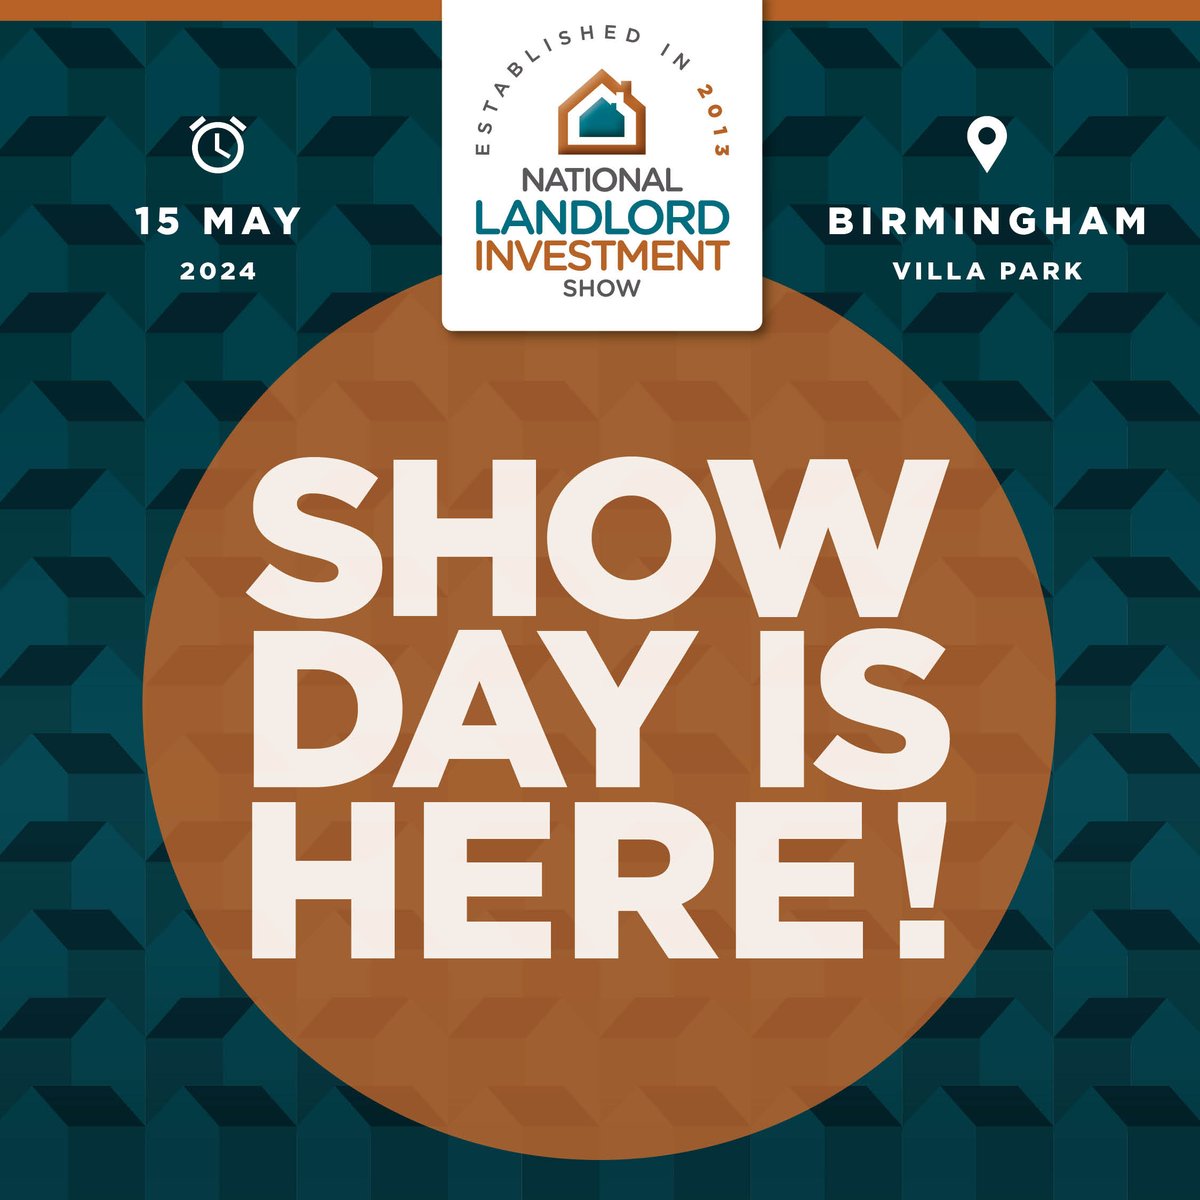 Show day is here!! If you haven't done so already, you can register for your FREE tickets here tinyurl.com/2879fzzw to our Birmingham Show today at Aston Villa FC. 50+ Exhibitors, 25+ Seminars, Panel Debate and Morning Networking Event. Doors open at 9am🏡